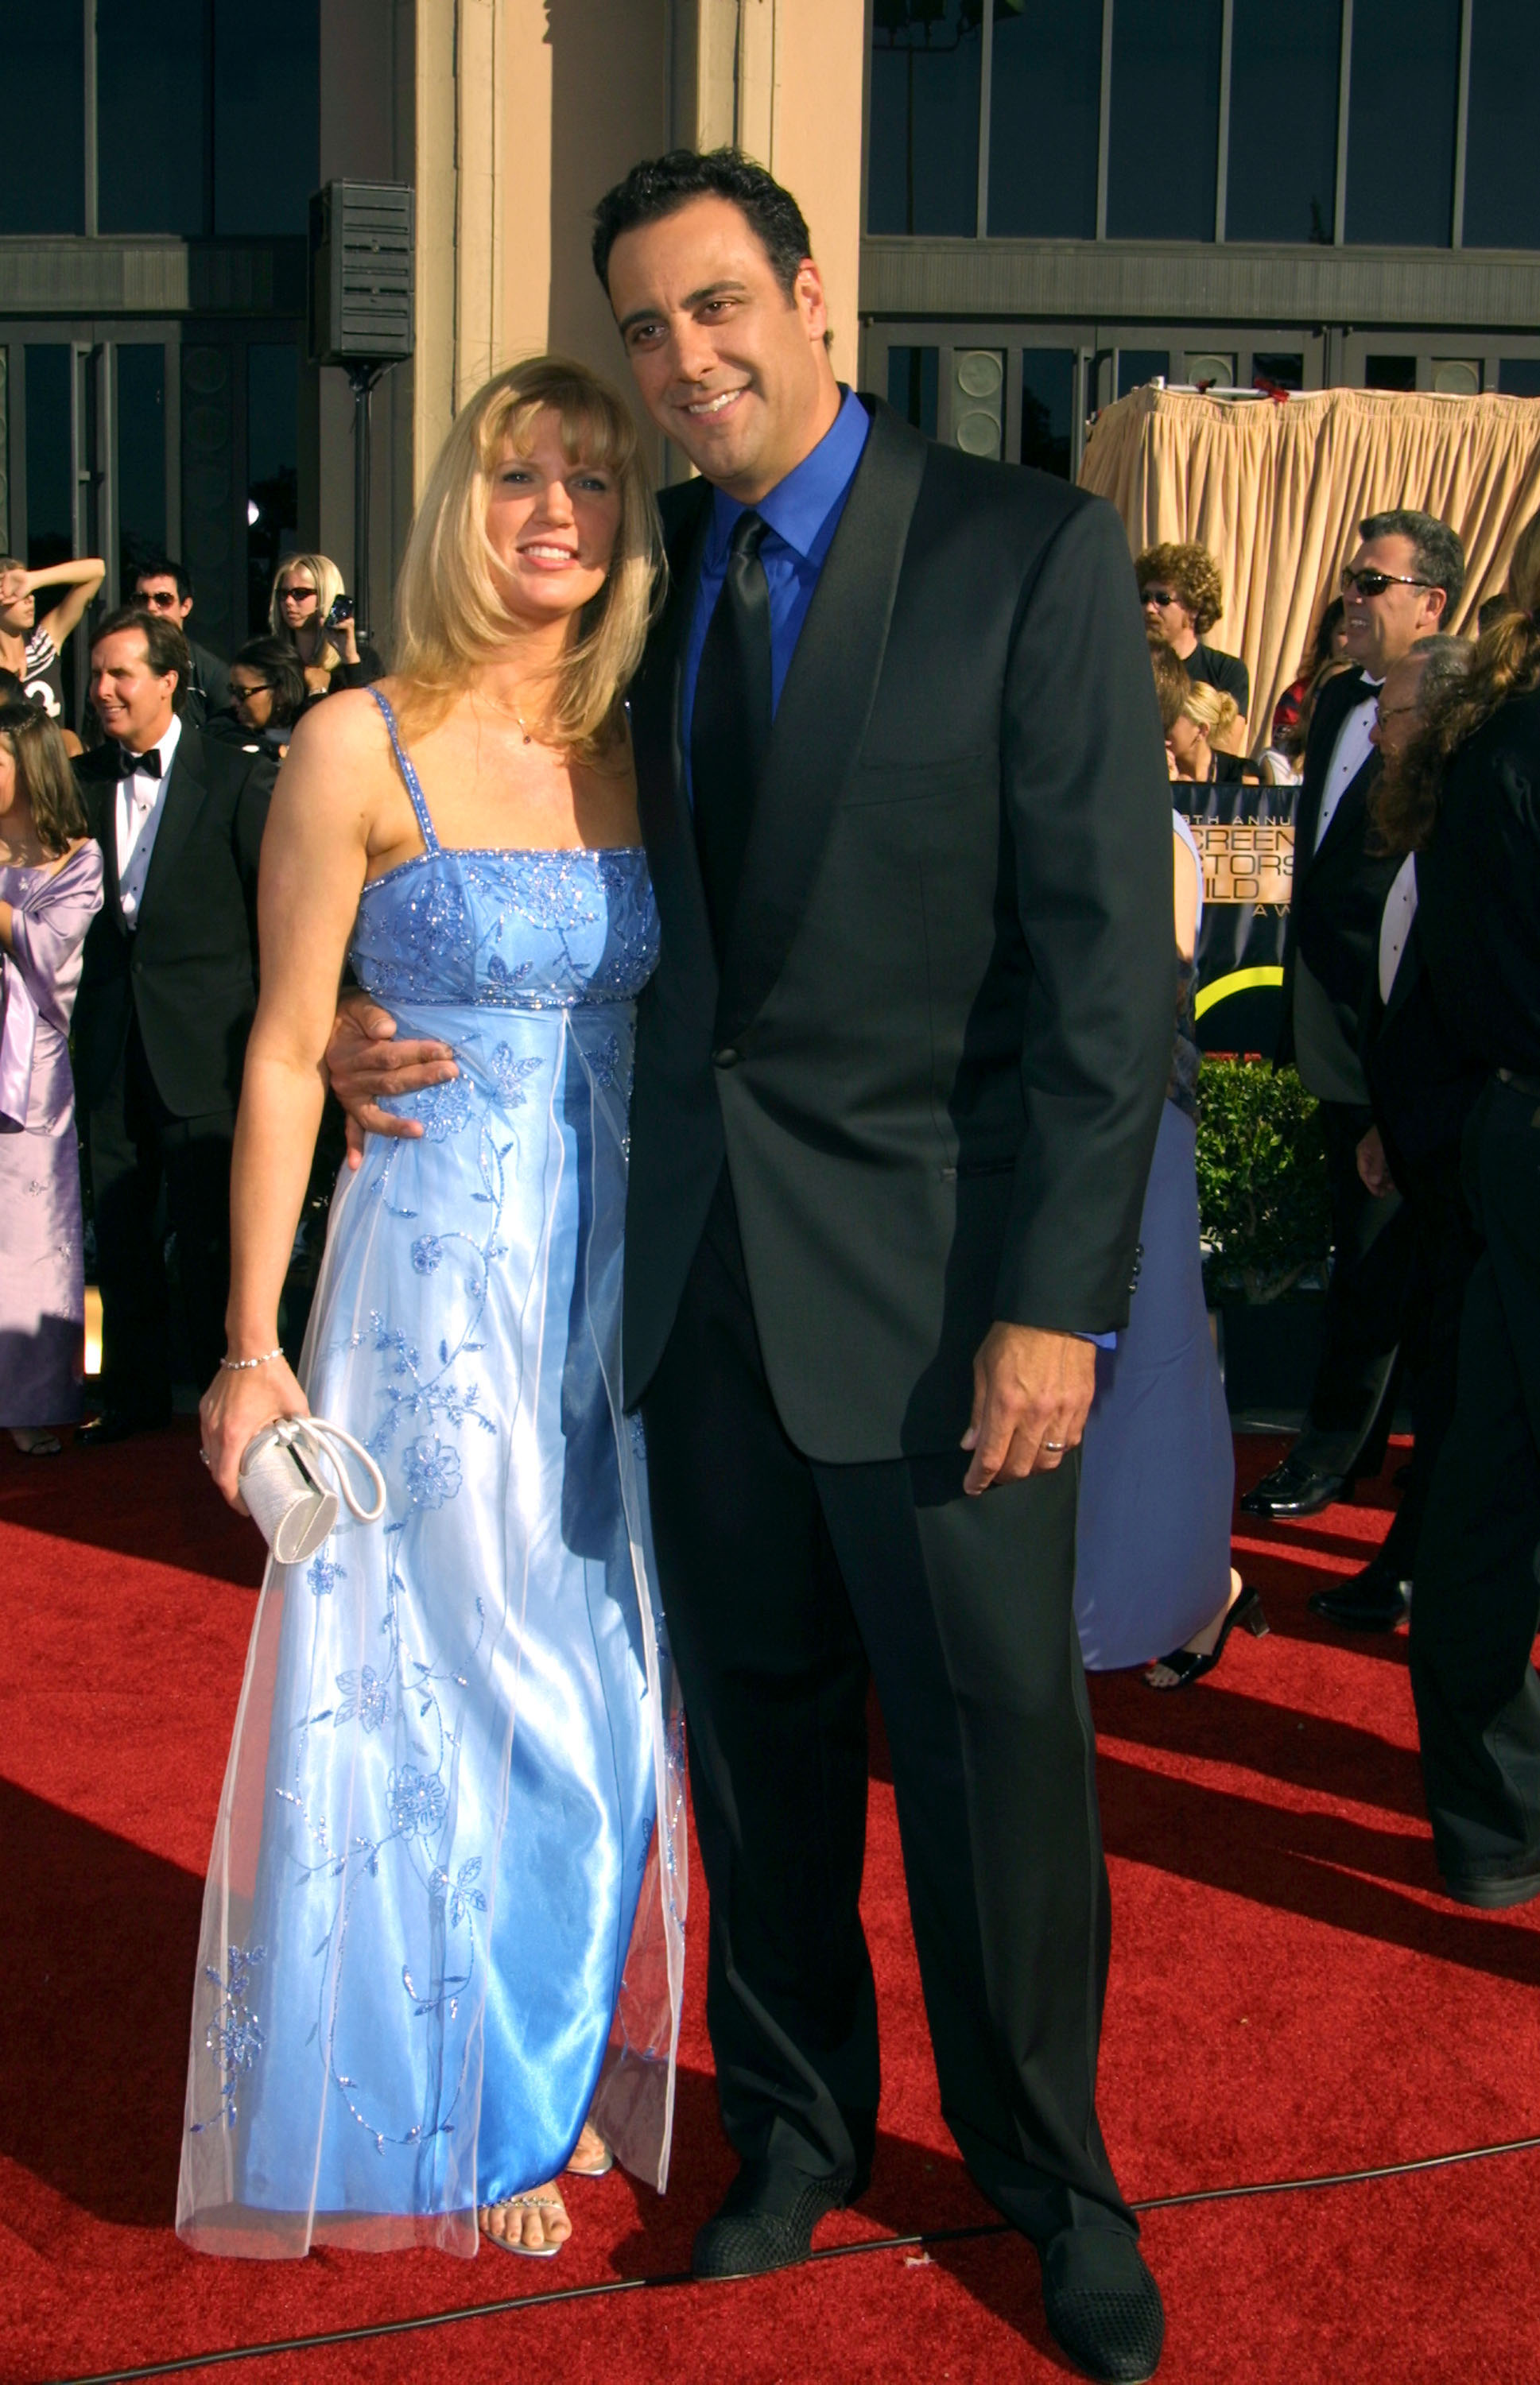 Jill Diven and Brad Garrett at The 8th Annual Screen Actors Guild Awards on March 10, 2002, in Los Angeles, California. | Source: Getty Images